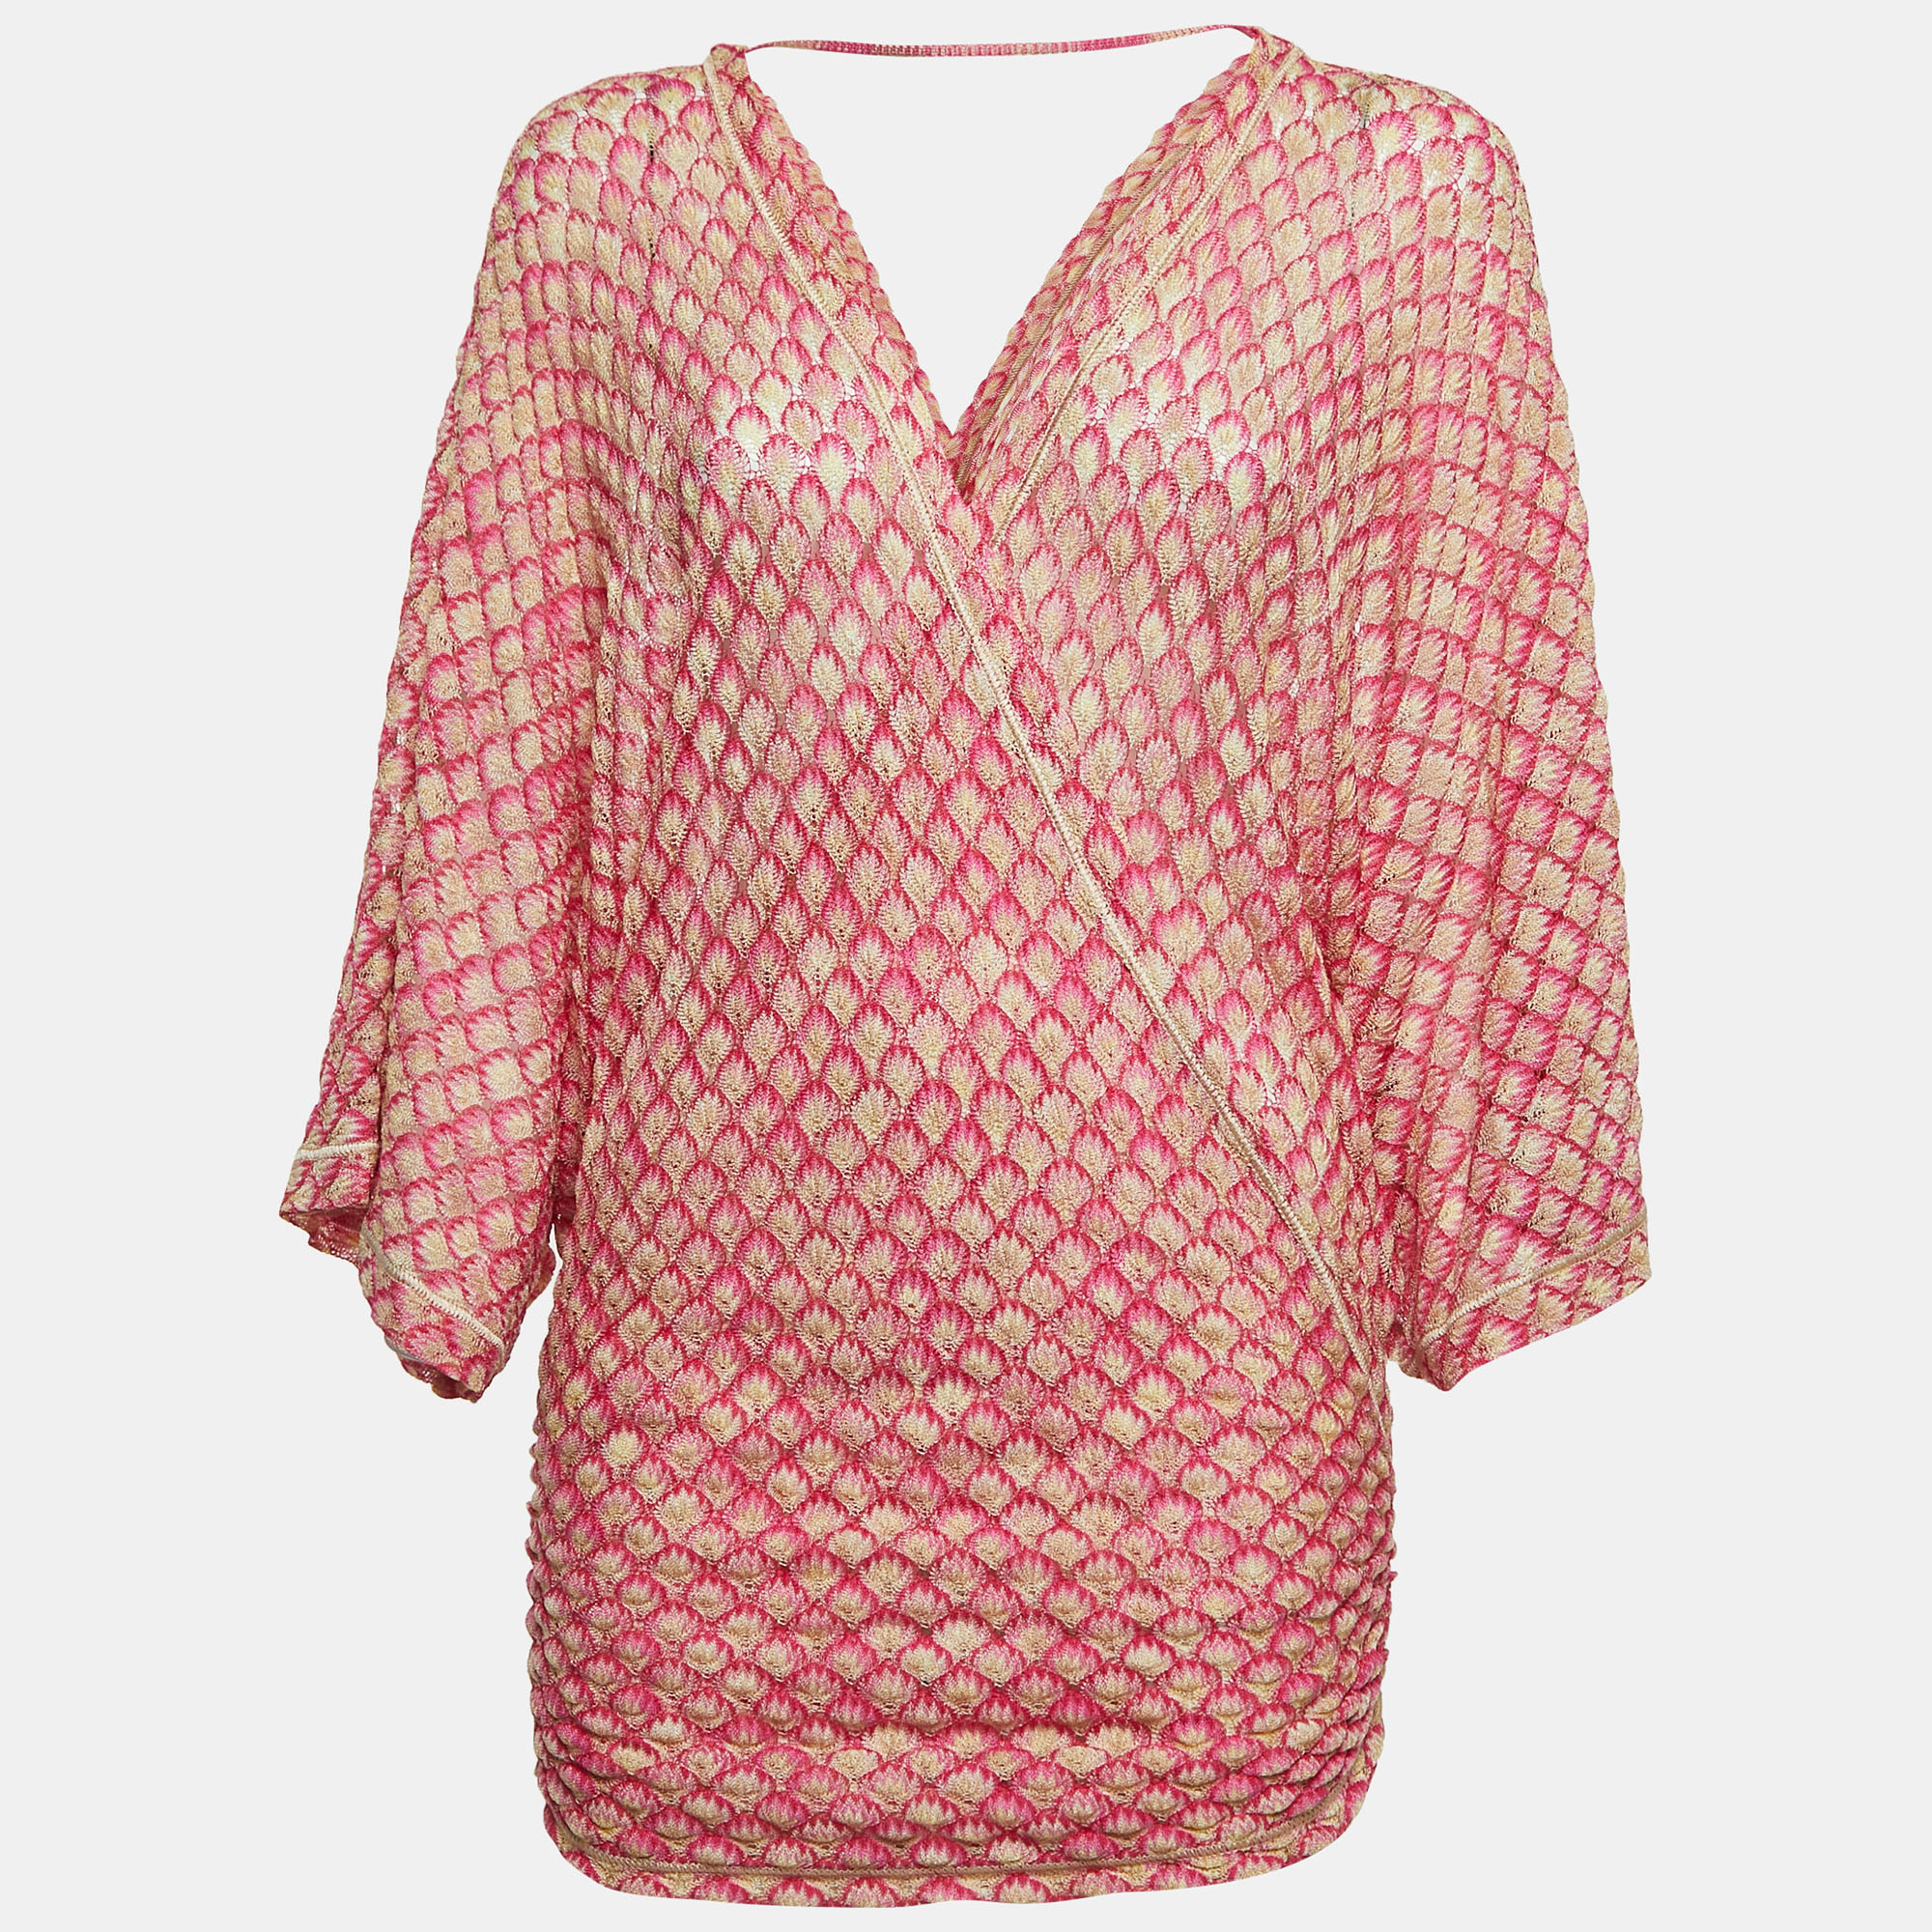 

Missoni Mare Pink Patterned Knit Ruch detailed Kimono Sleeve Top S